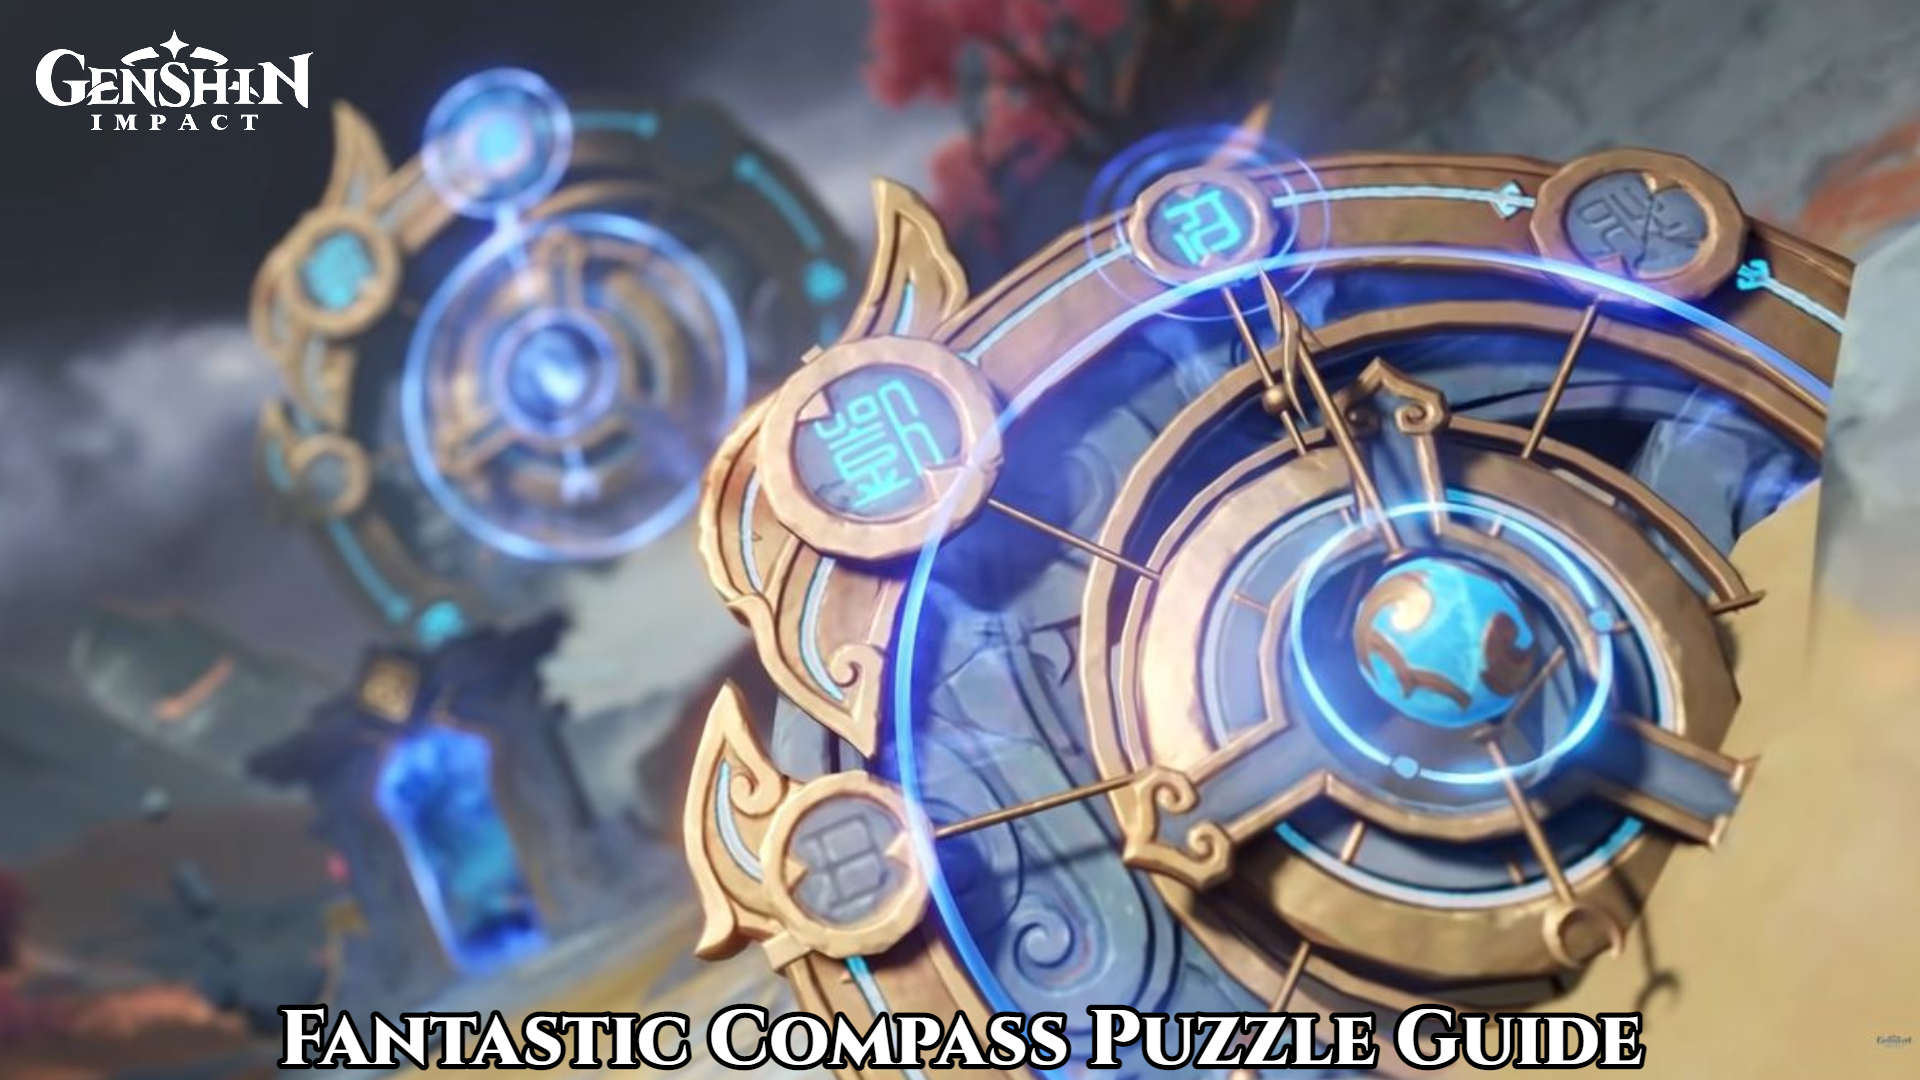 You are currently viewing Genshin Impact Fantastic Compass Puzzle Guide